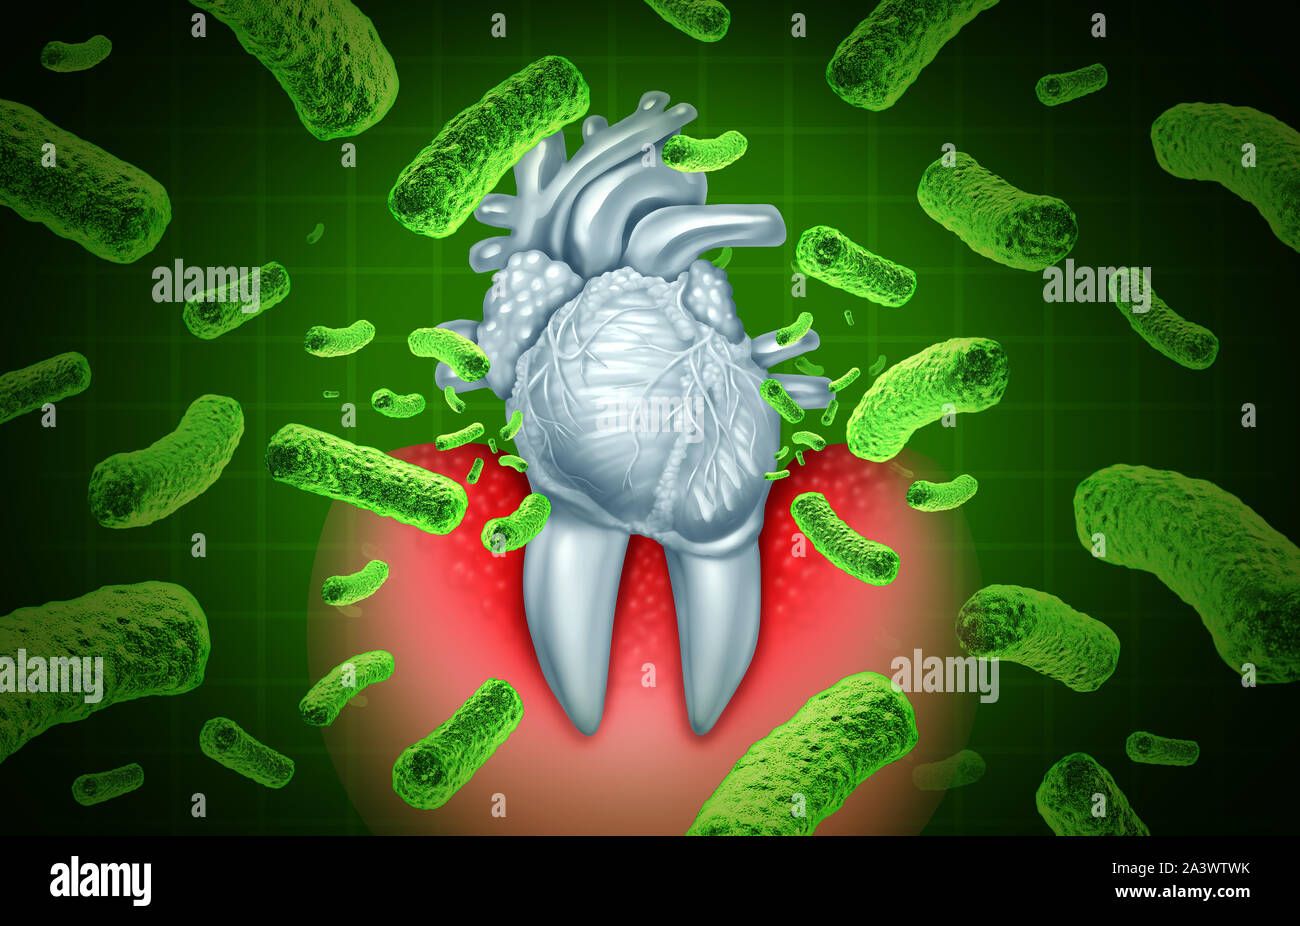 Periodontitis gum disease and poor oral hygiene health problem as a bacteria infection entering the blood stream affecting the human heart damaging. Stock Photo